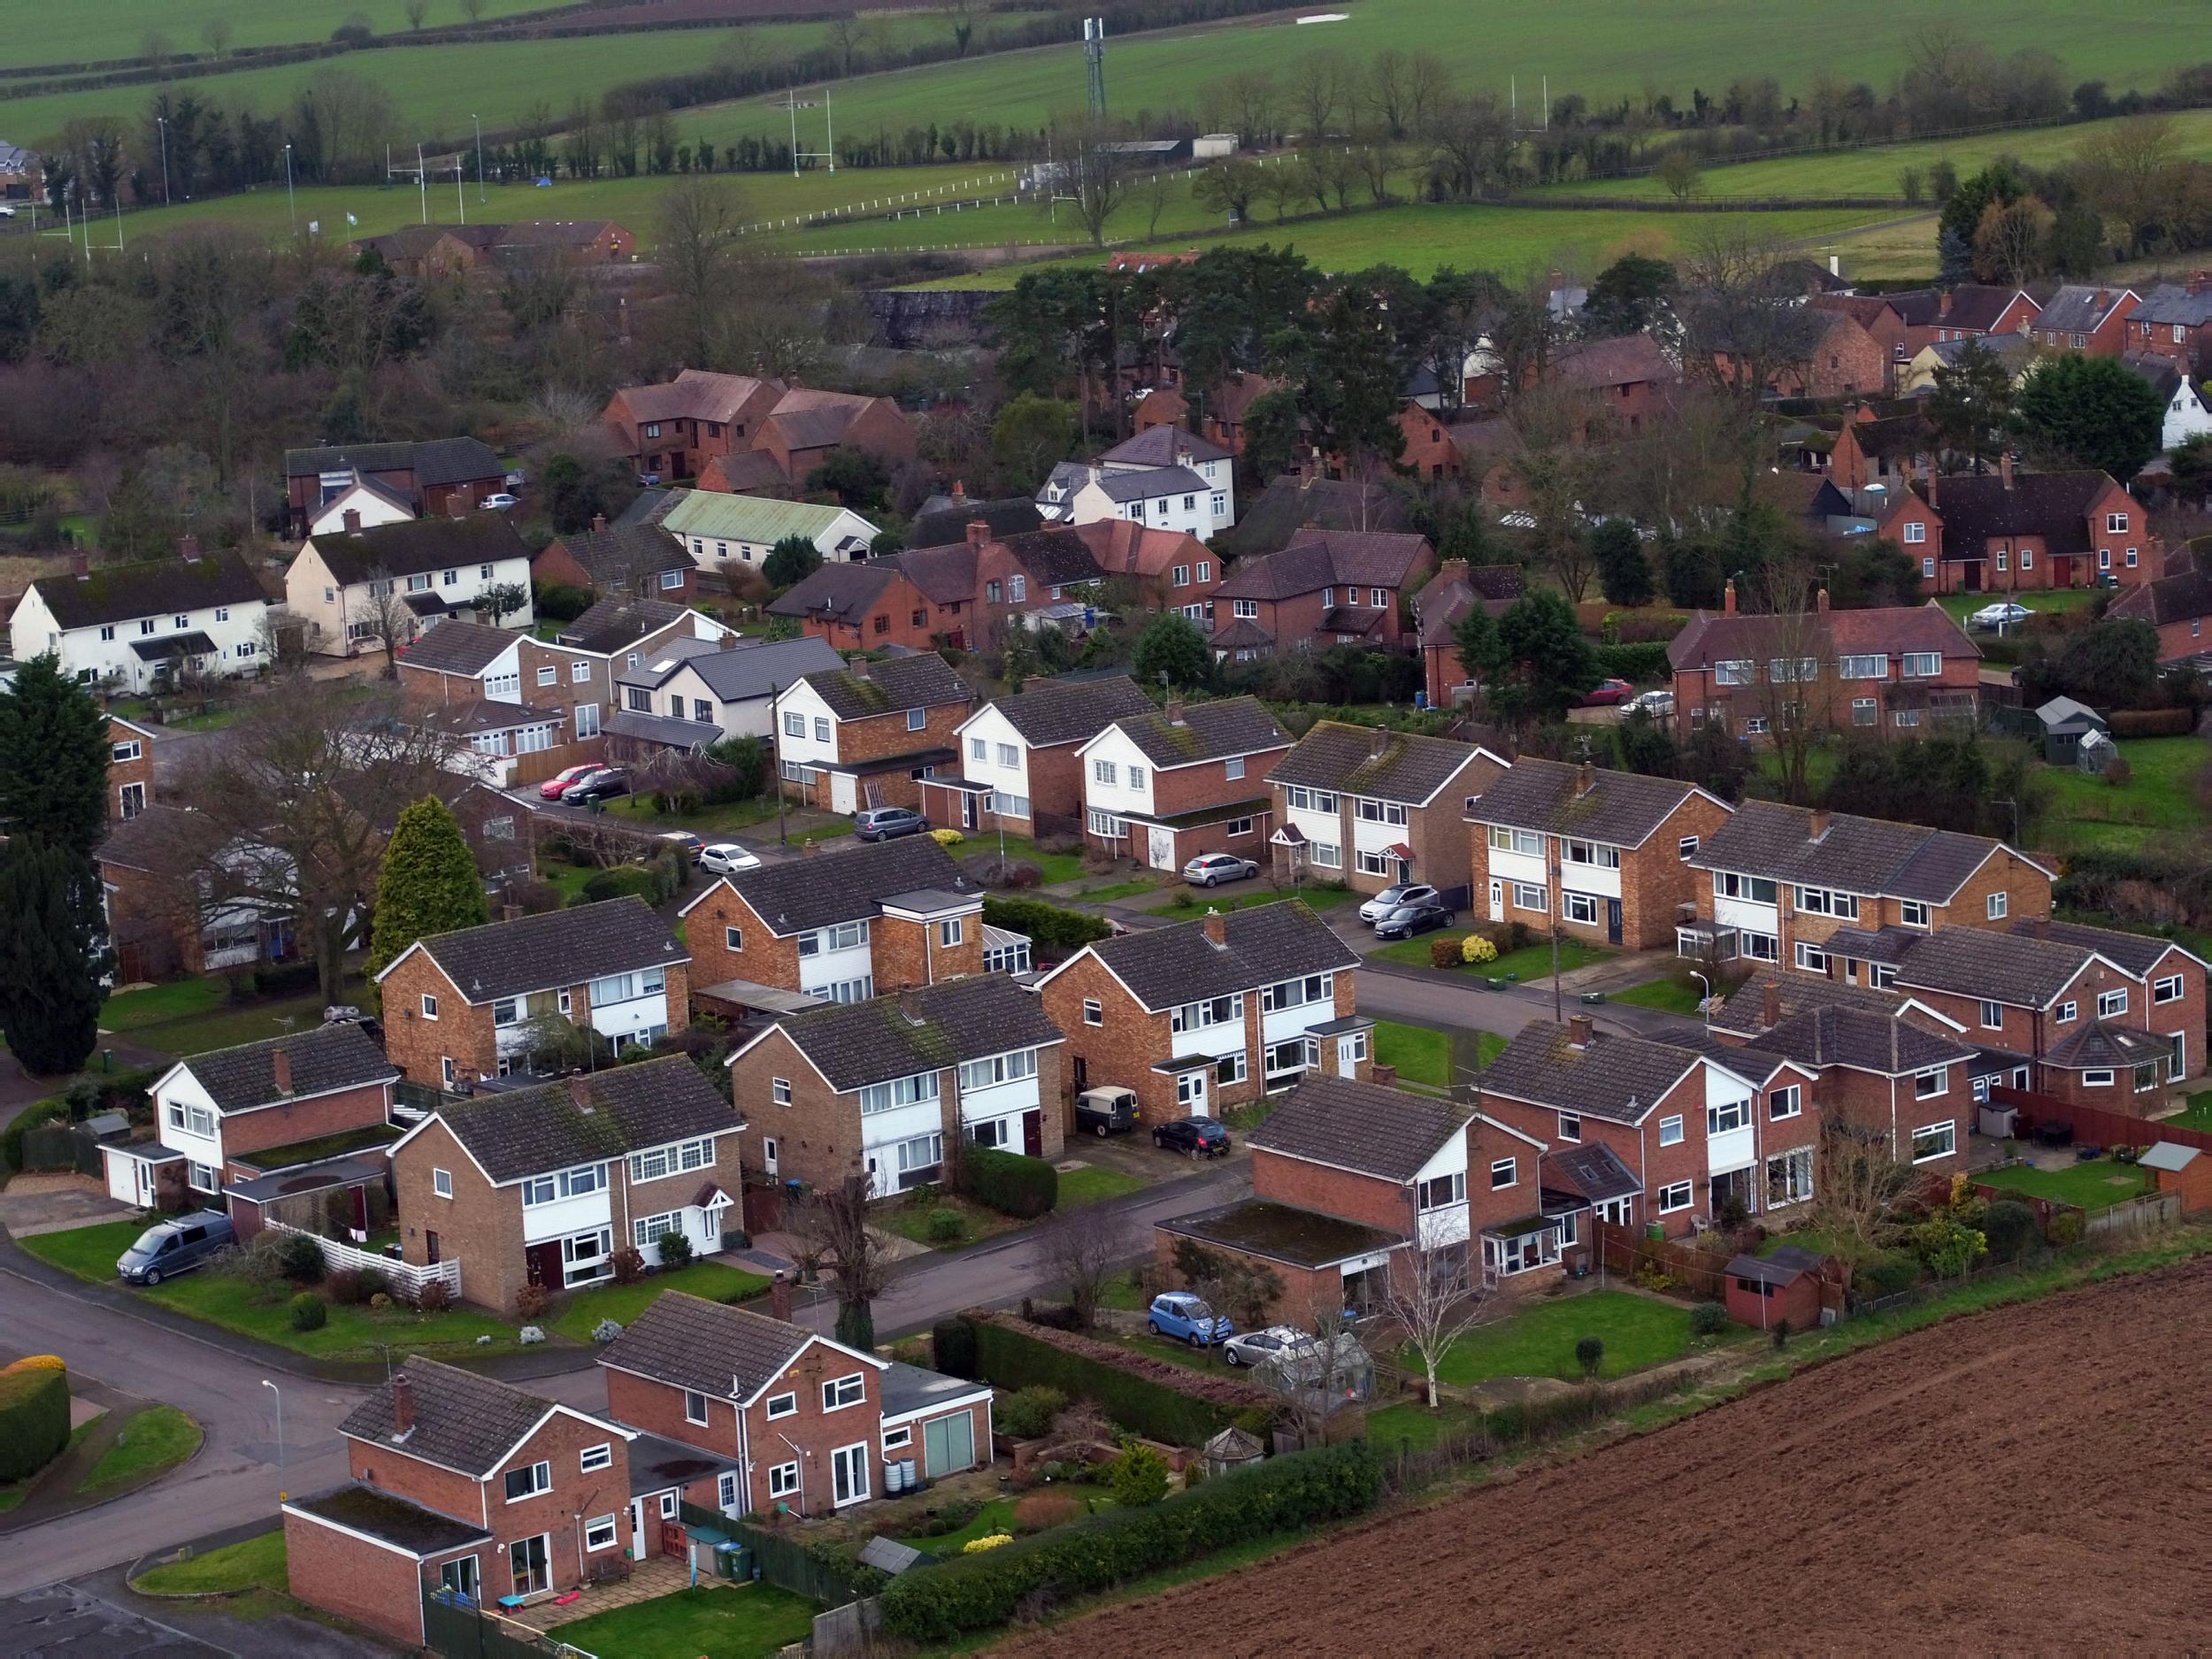 The two alleged victims were neighbours in Maids Moreton, a village in Buckinghamshire